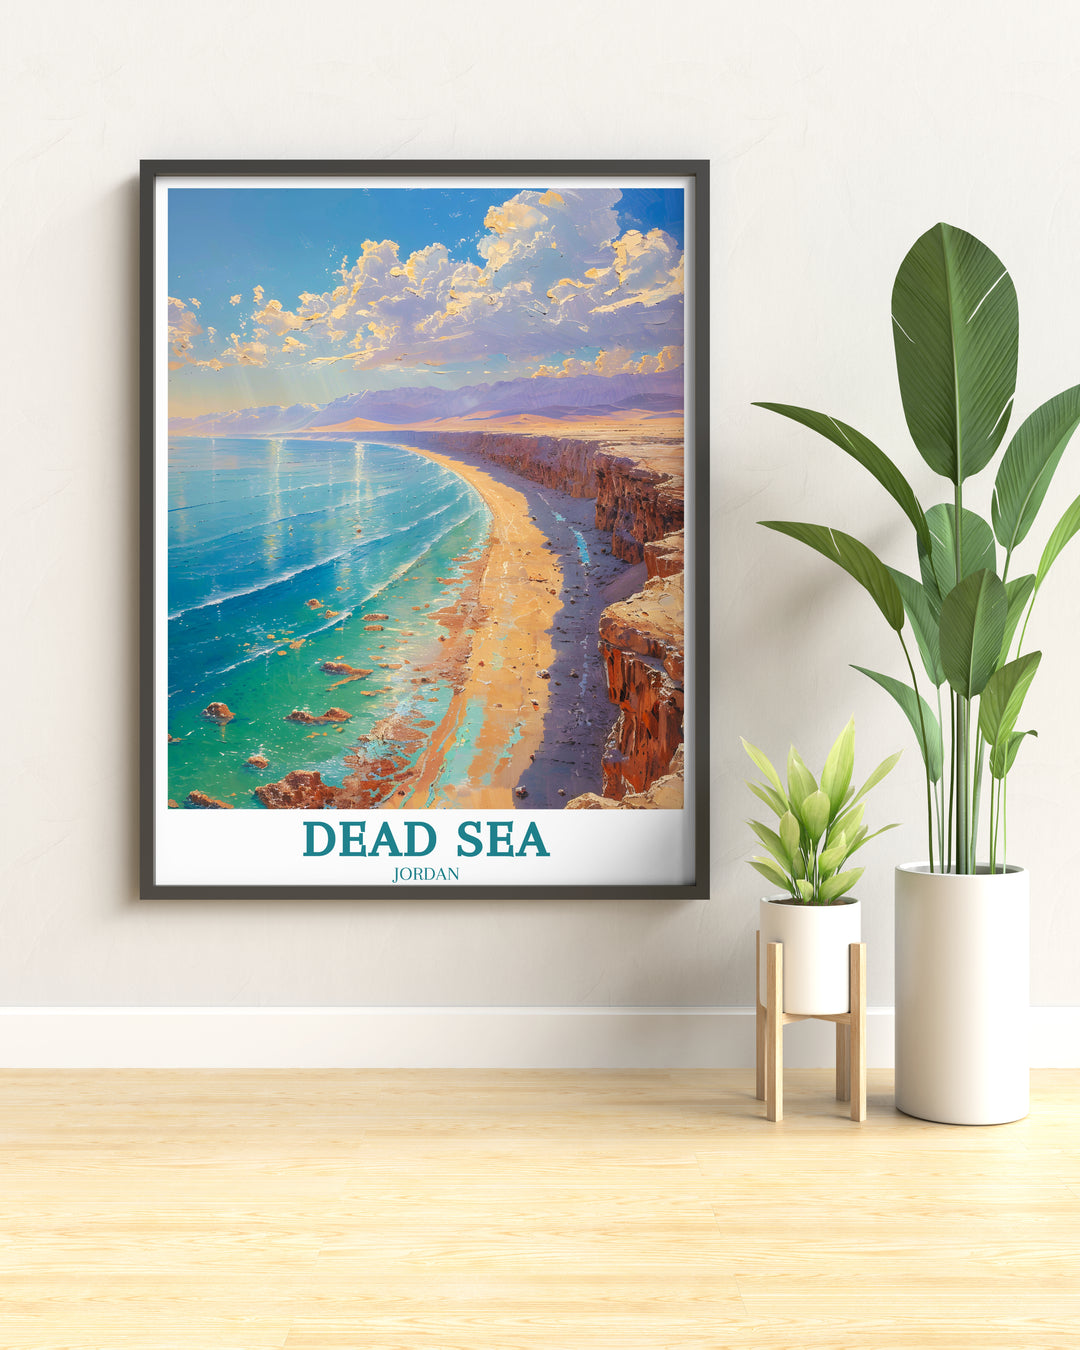 Between Israel and Jordan - Timeless Dead Sea Posters as Unique Gifts